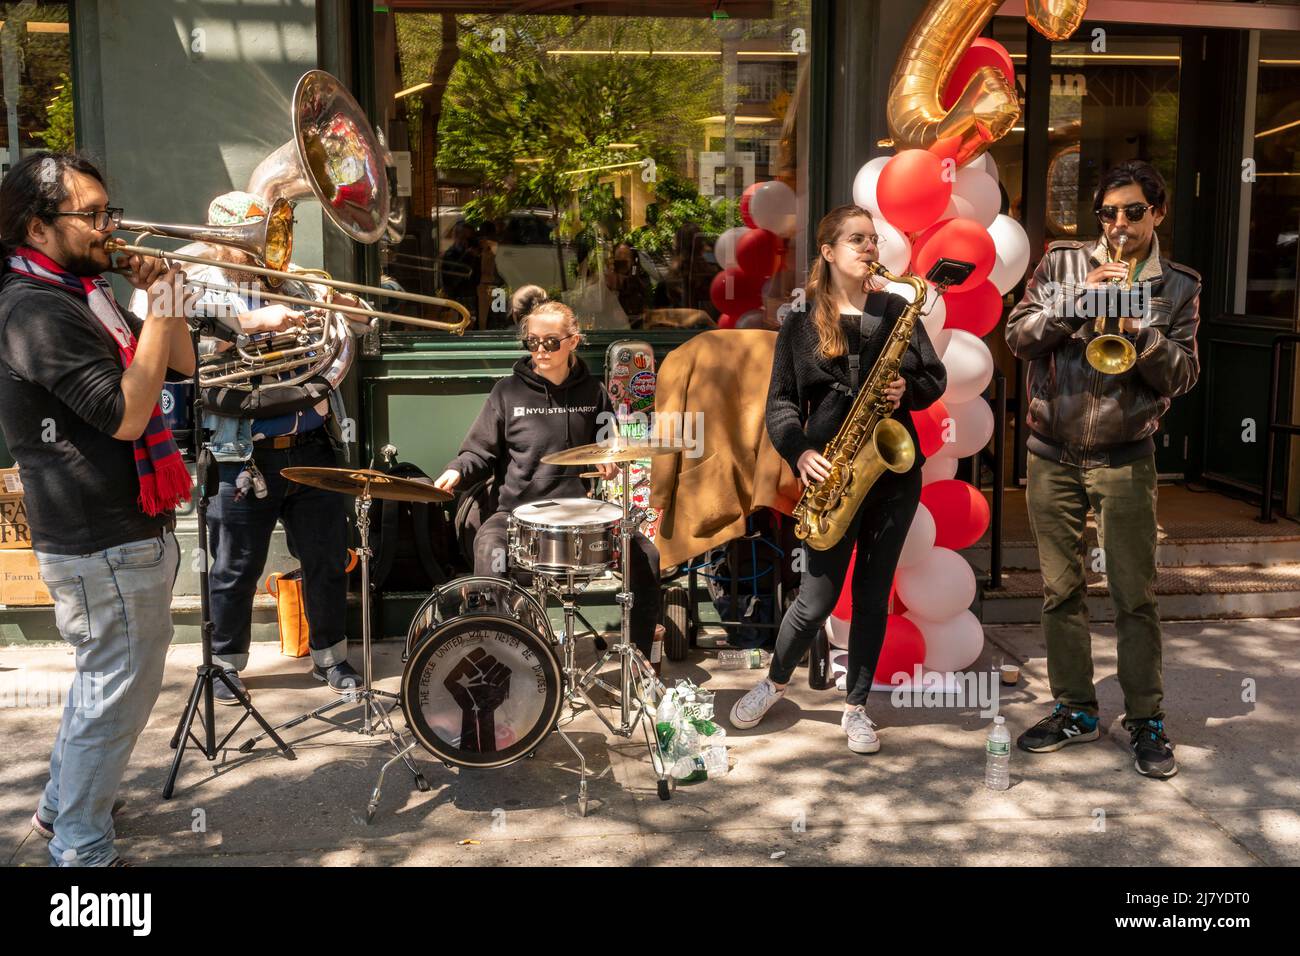 A band plays at the grand opening of a Gourmet Garage supermarket in Greenwich Village in New York on Friday, April 29, 2022. Inflation increased consumer prices 6.6% in March, the fastest rise since 1982. (© Richard B. Levine) Stock Photo